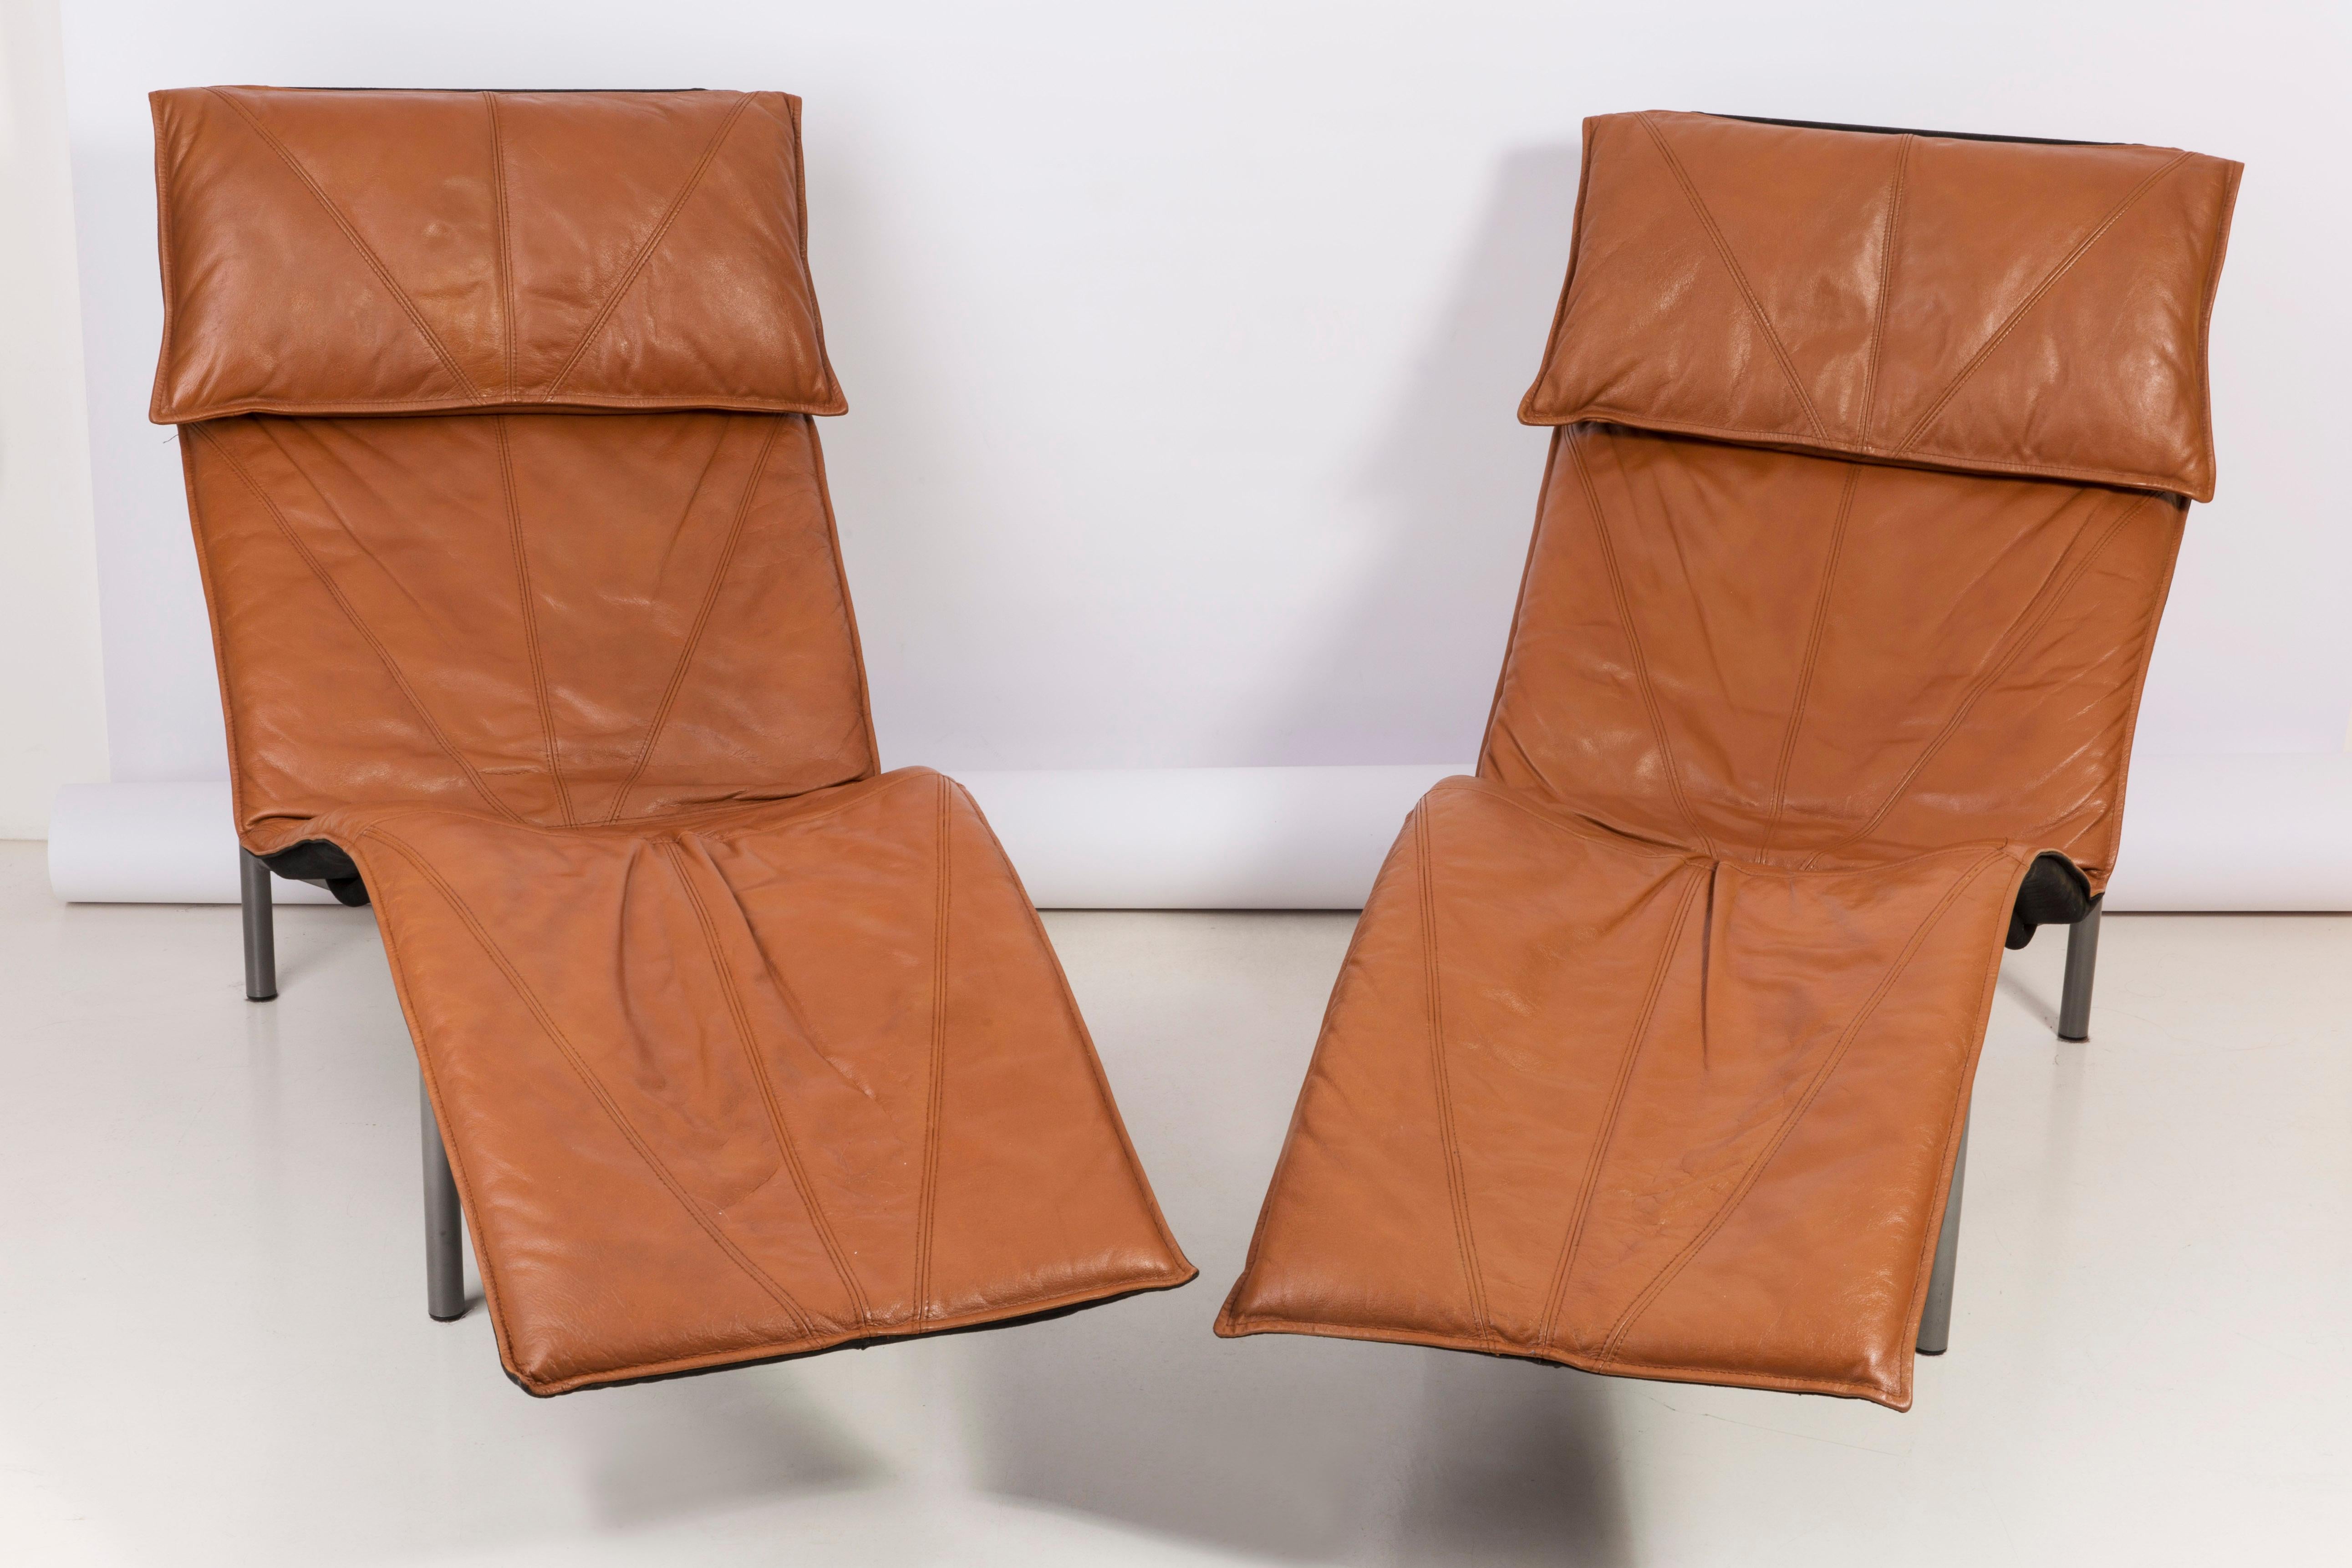 Midcentury Danish Modern Brown Leather Chaise Lounge Chair by Tord Björklund For Sale 1